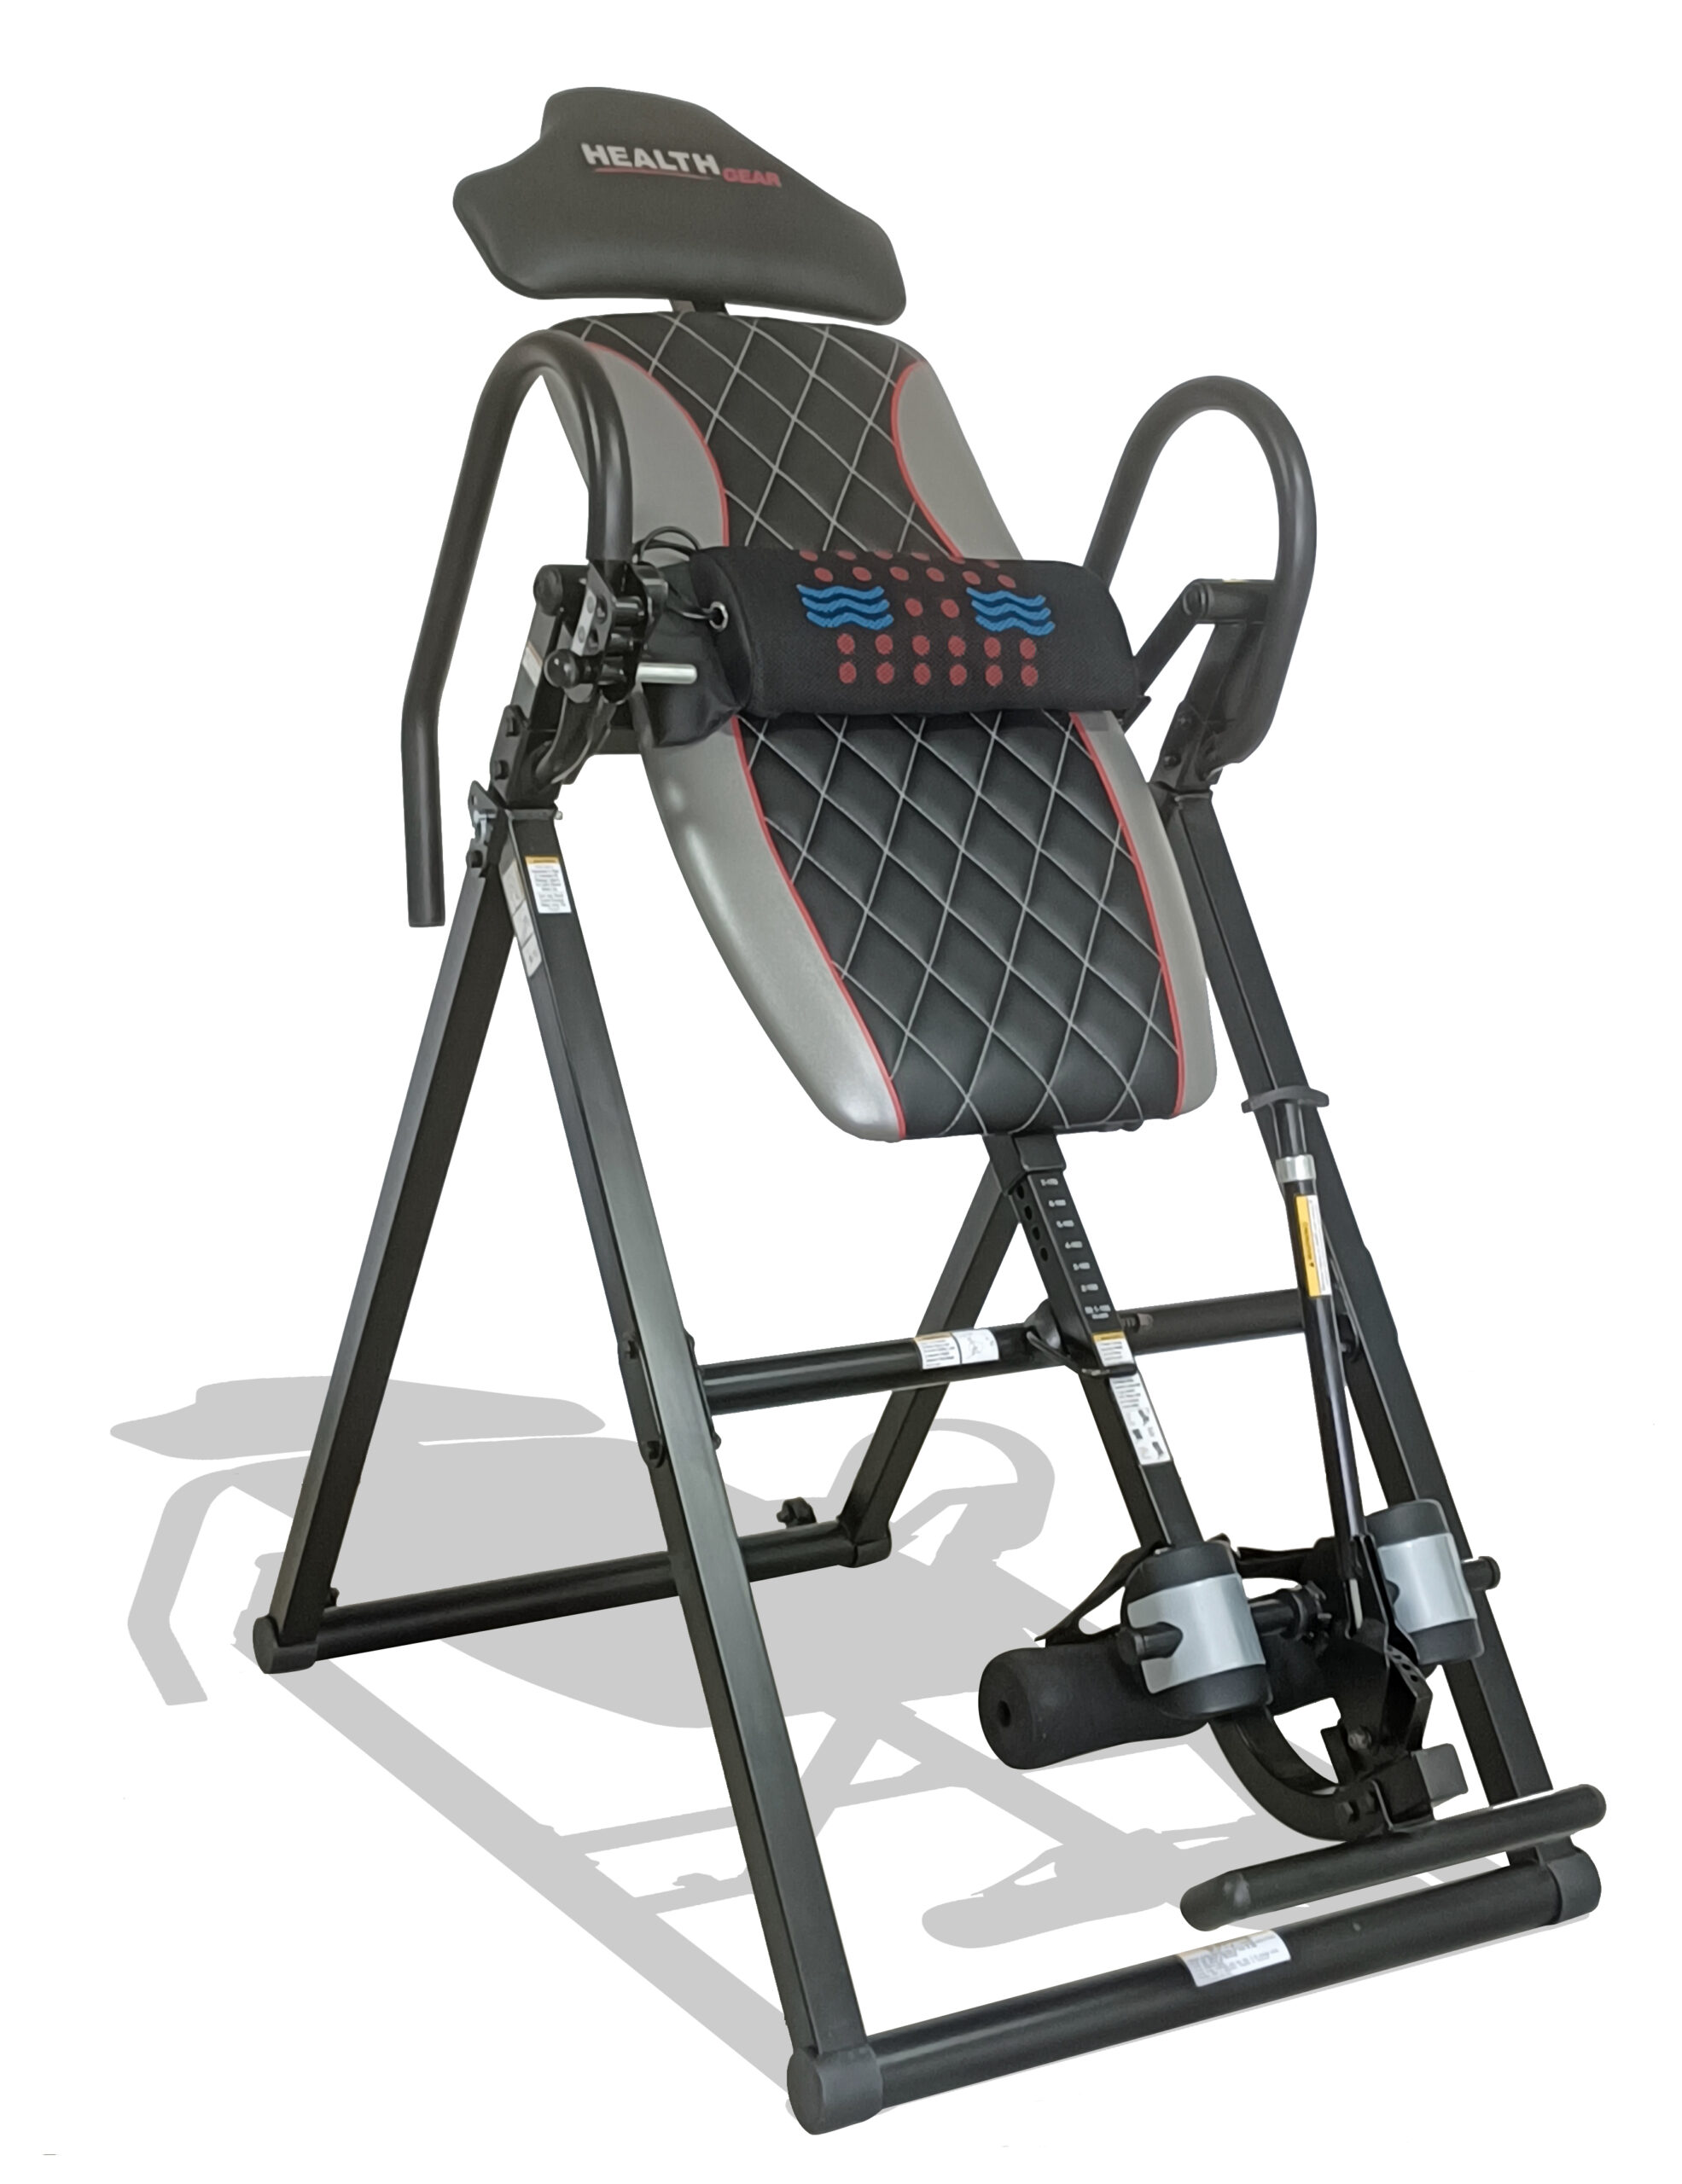 Health Gear HGI 5.3 Inversion Table for Back Pain Relief and Core Strengthening in an Extreme Workout Setting.